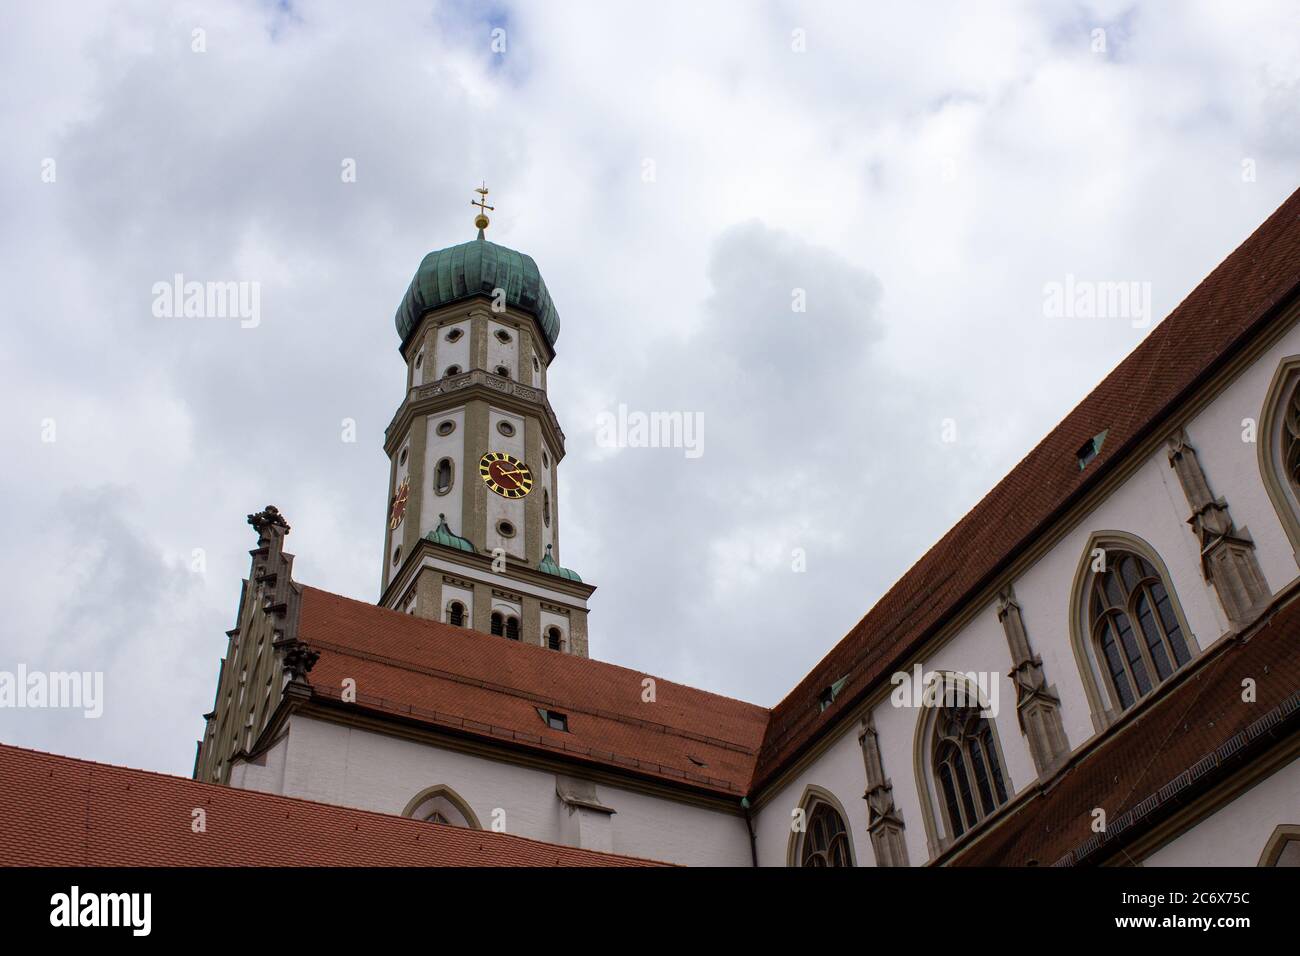 Facade of the St. Ulrich and St. Afra's Abbey in Augsburg, Bavaria, Germany. Long history monastery and Basilica. Stock Photo